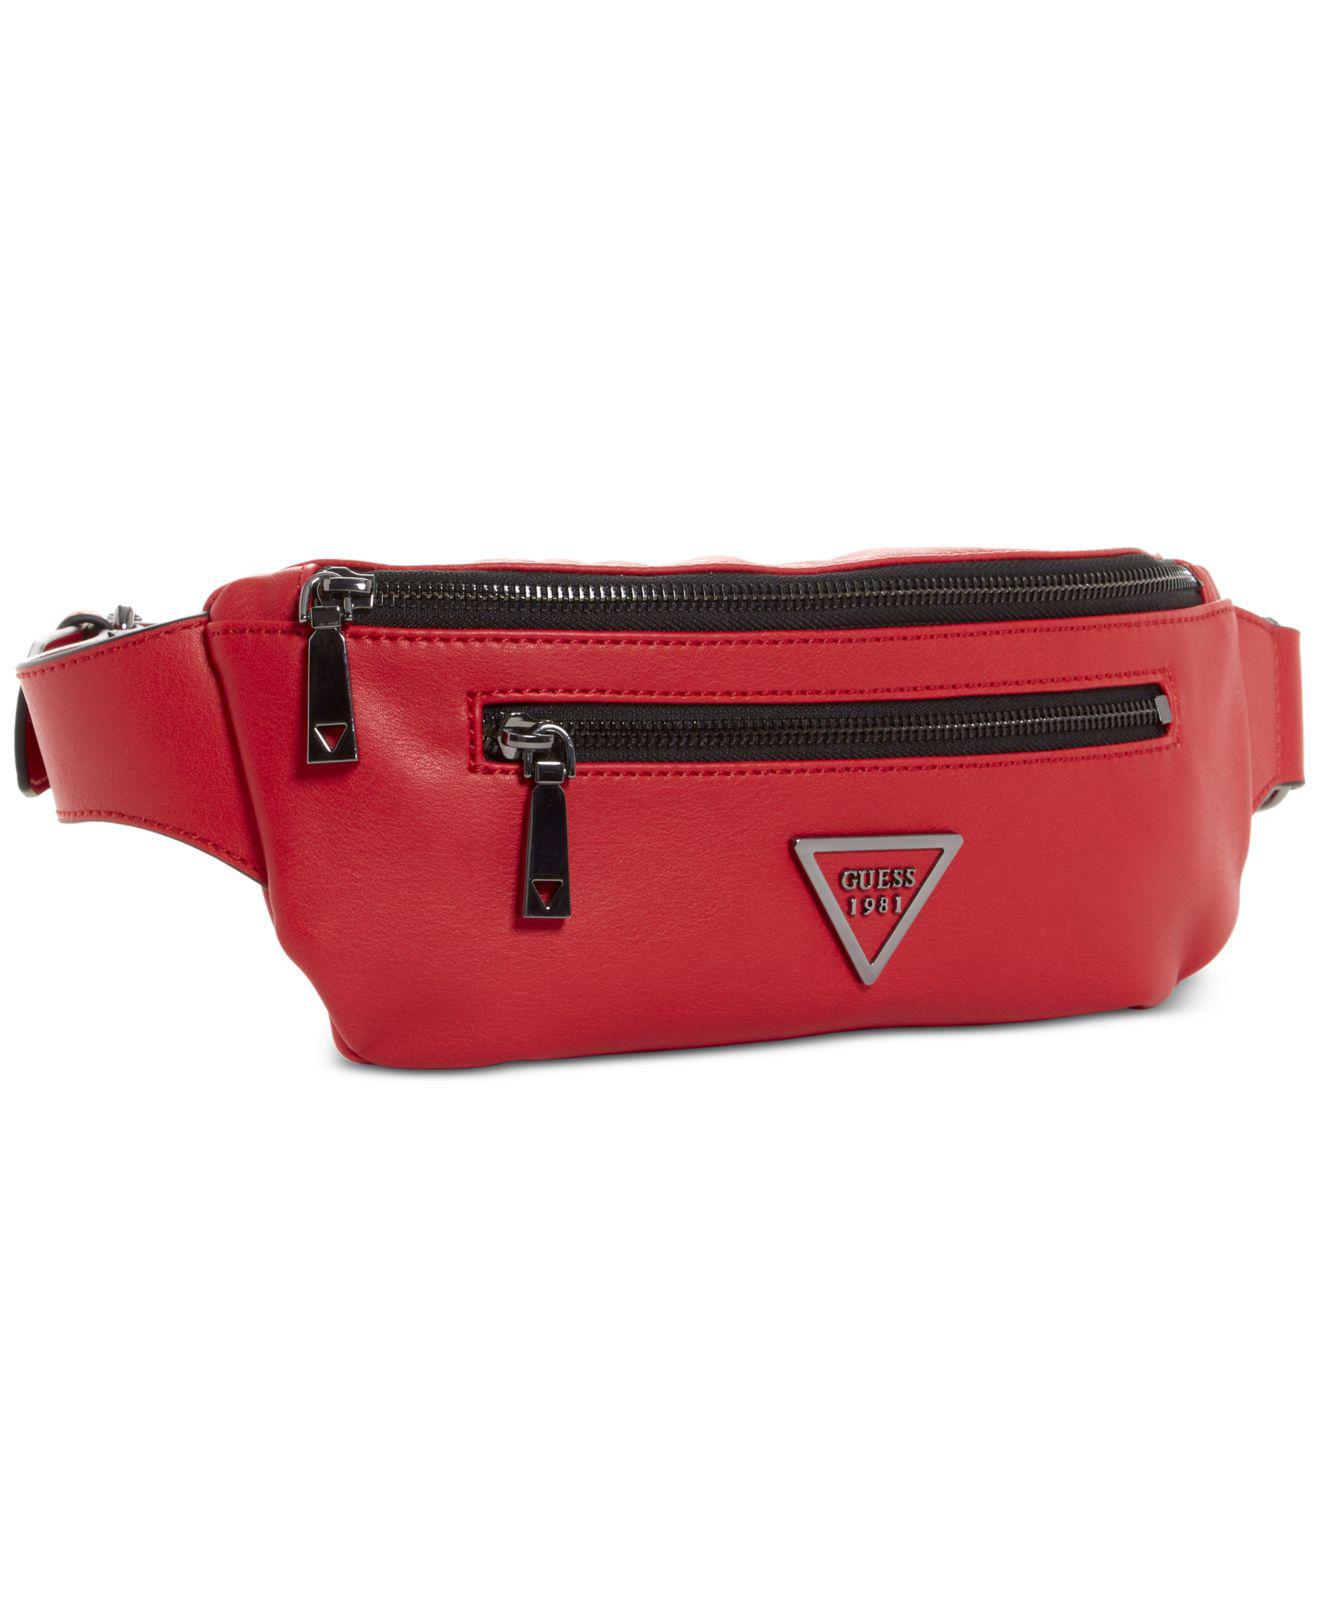 Guess Urban Sport Fanny Pack in Red/Silver (Red) - Lyst